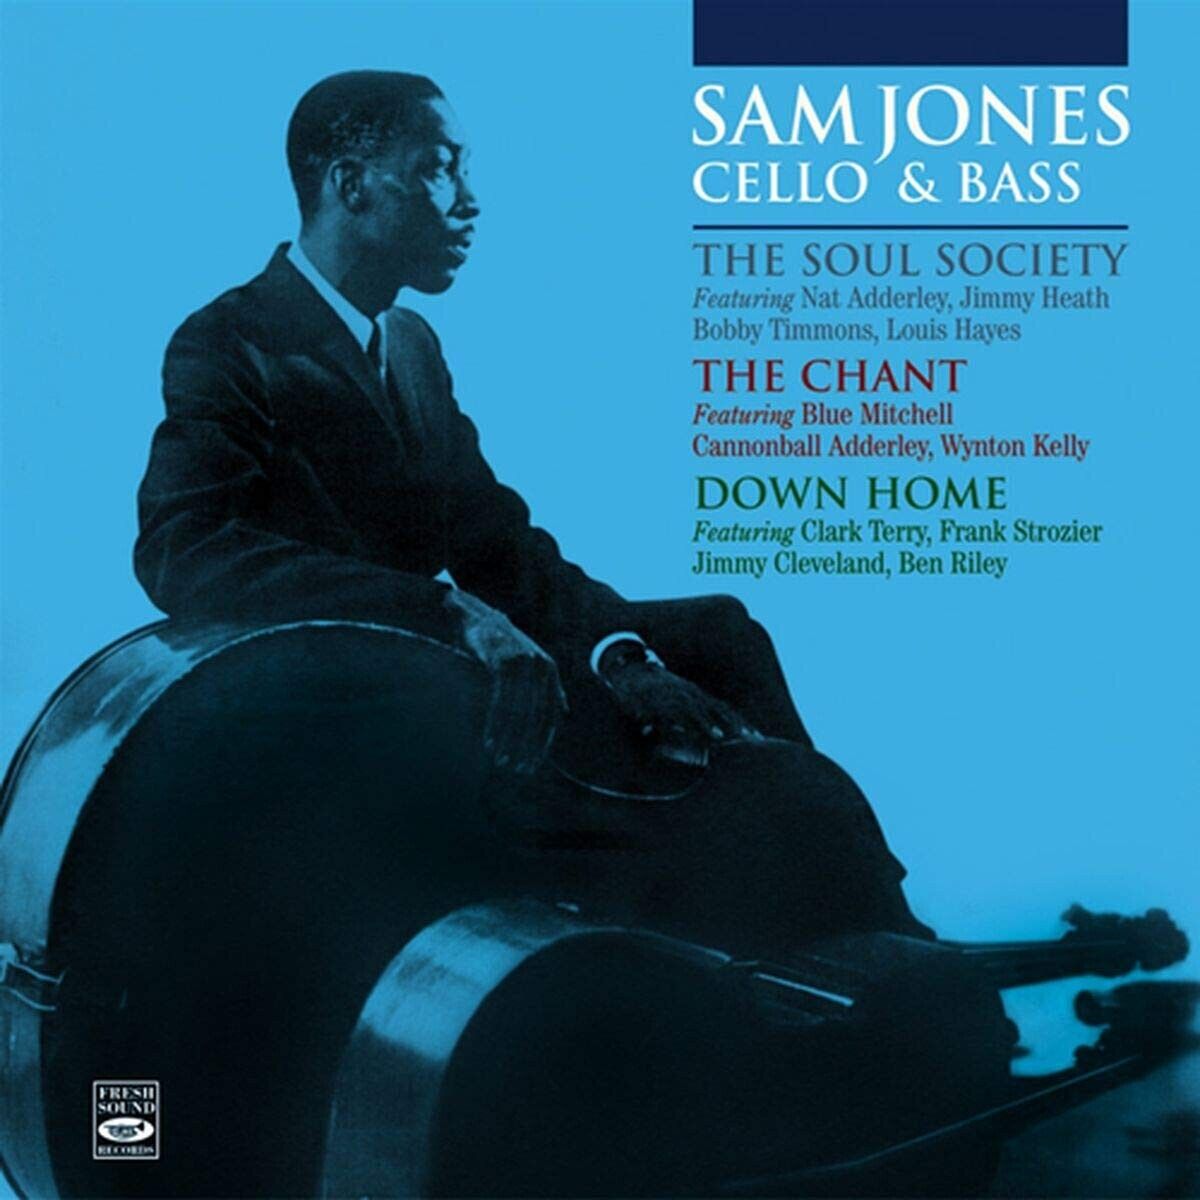 Sam Jones Cello and Bass The Soul Society, The Chant, Down Home (2 CD)